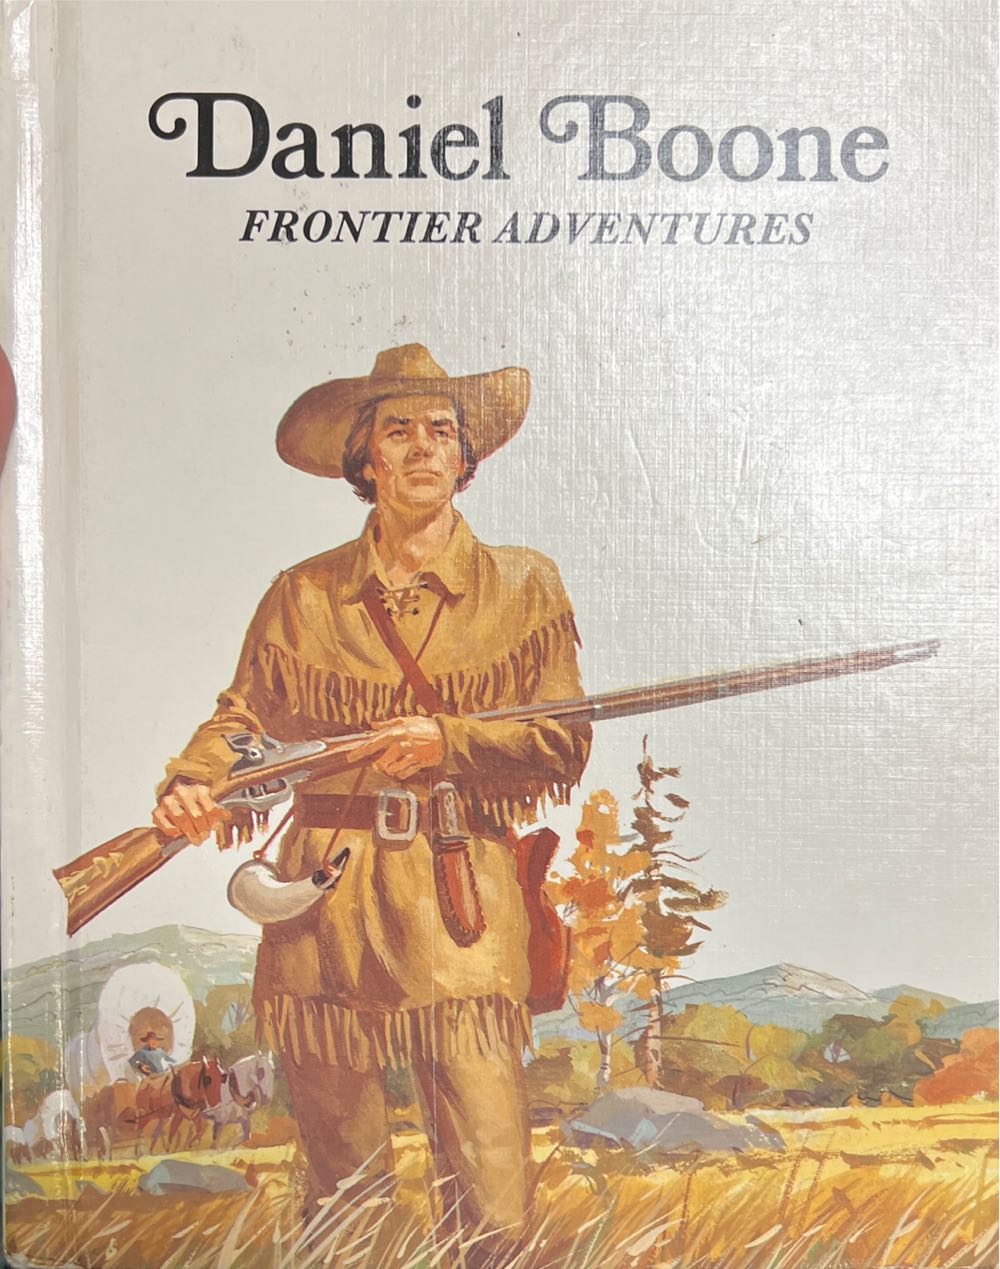 Daniel Boone, Frontier Adventures - Keith Brandt (Troll Communications Llc) book collectible [Barcode 9780893758431] - Main Image 1